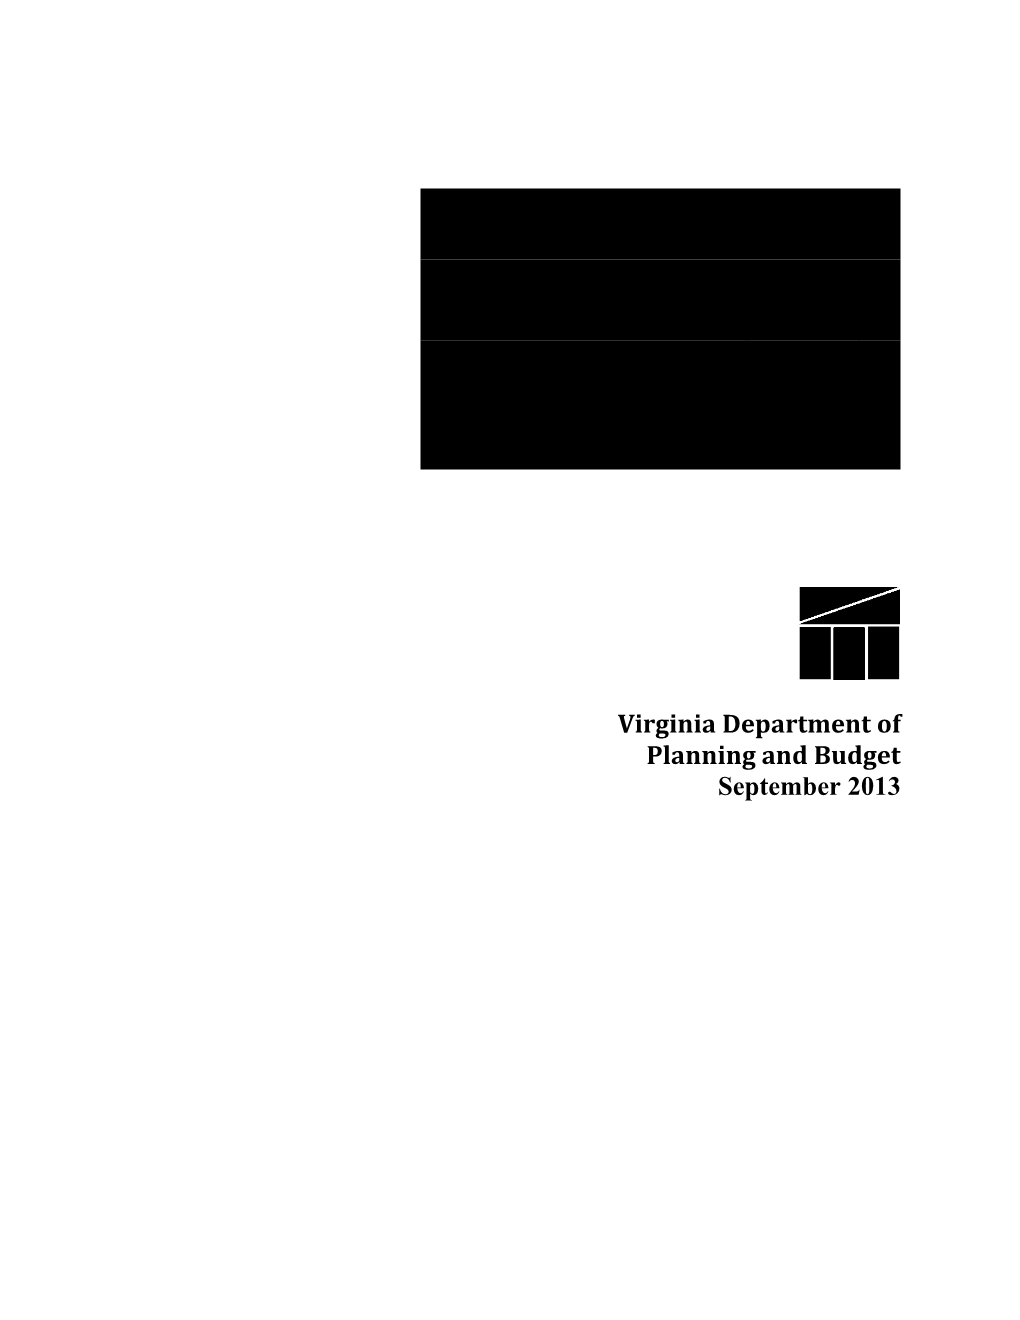 Virginia Department of Planning and Budget